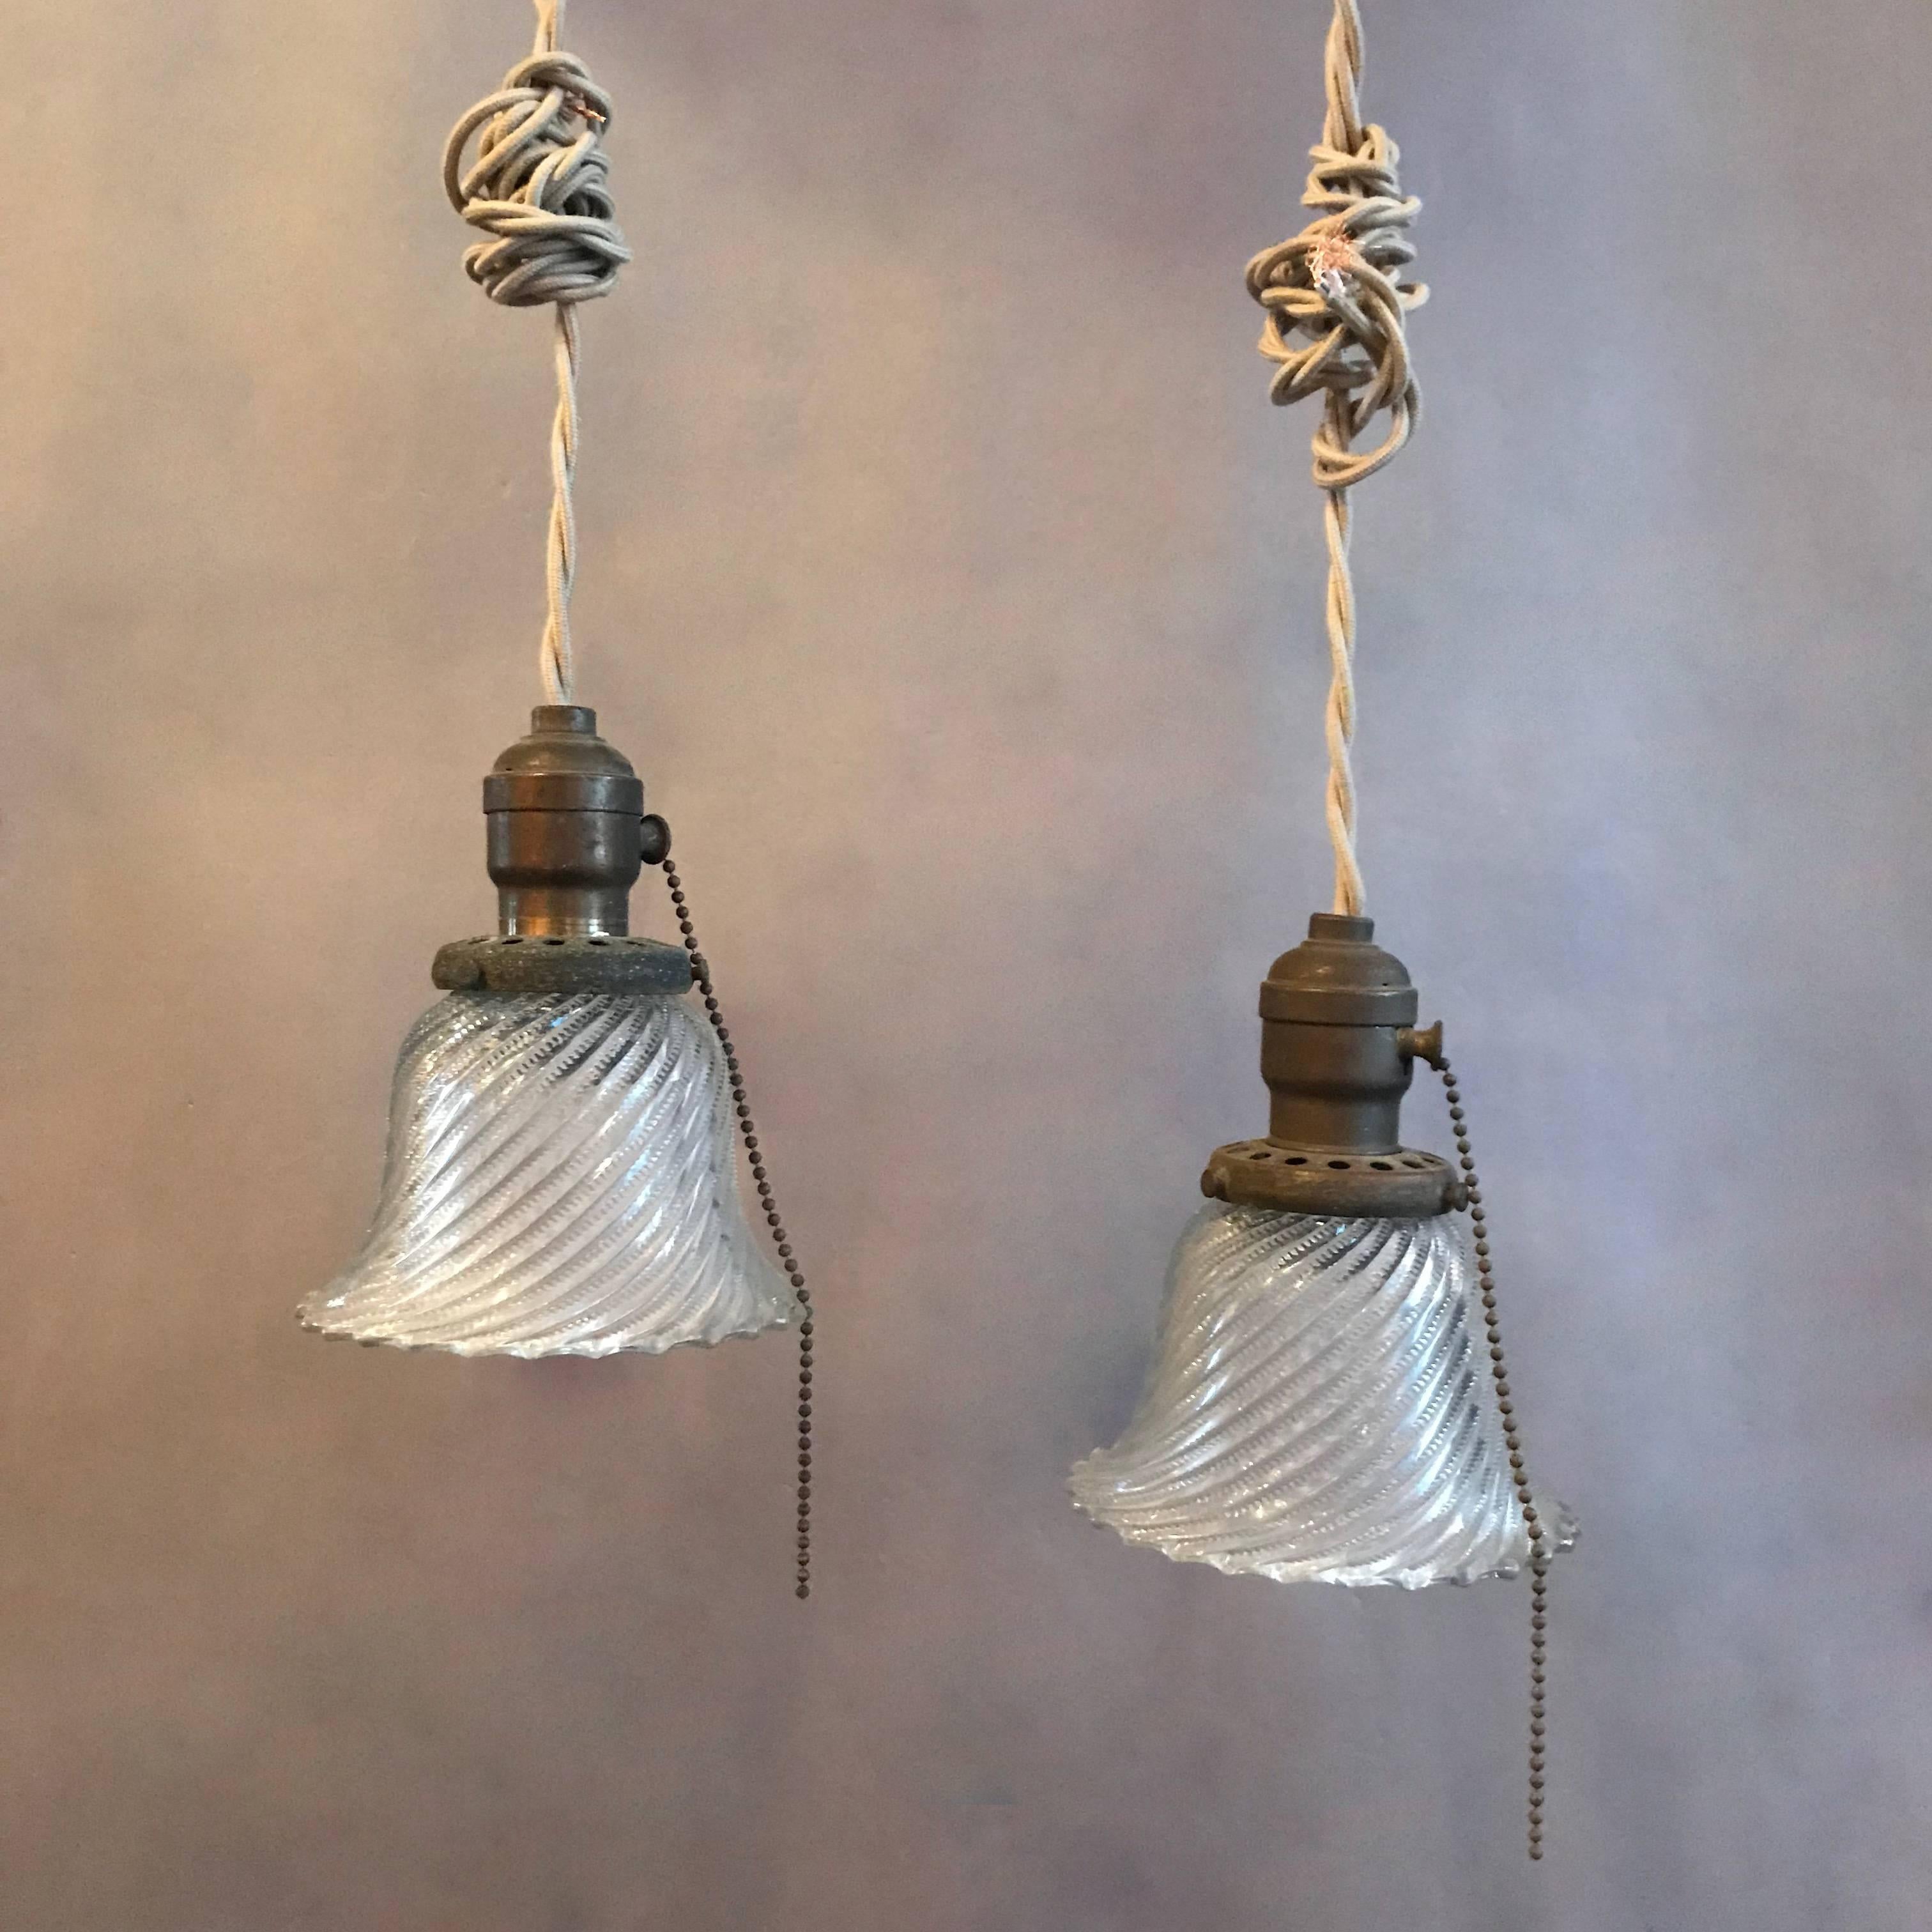 Industrial, diagonal swirled, prismatic, Holophane glass pendant lights feature bell shaped shades with ruffled edges and brass fitters with pull chains. These lights are newly wired with 48in. of braided cloth cord.